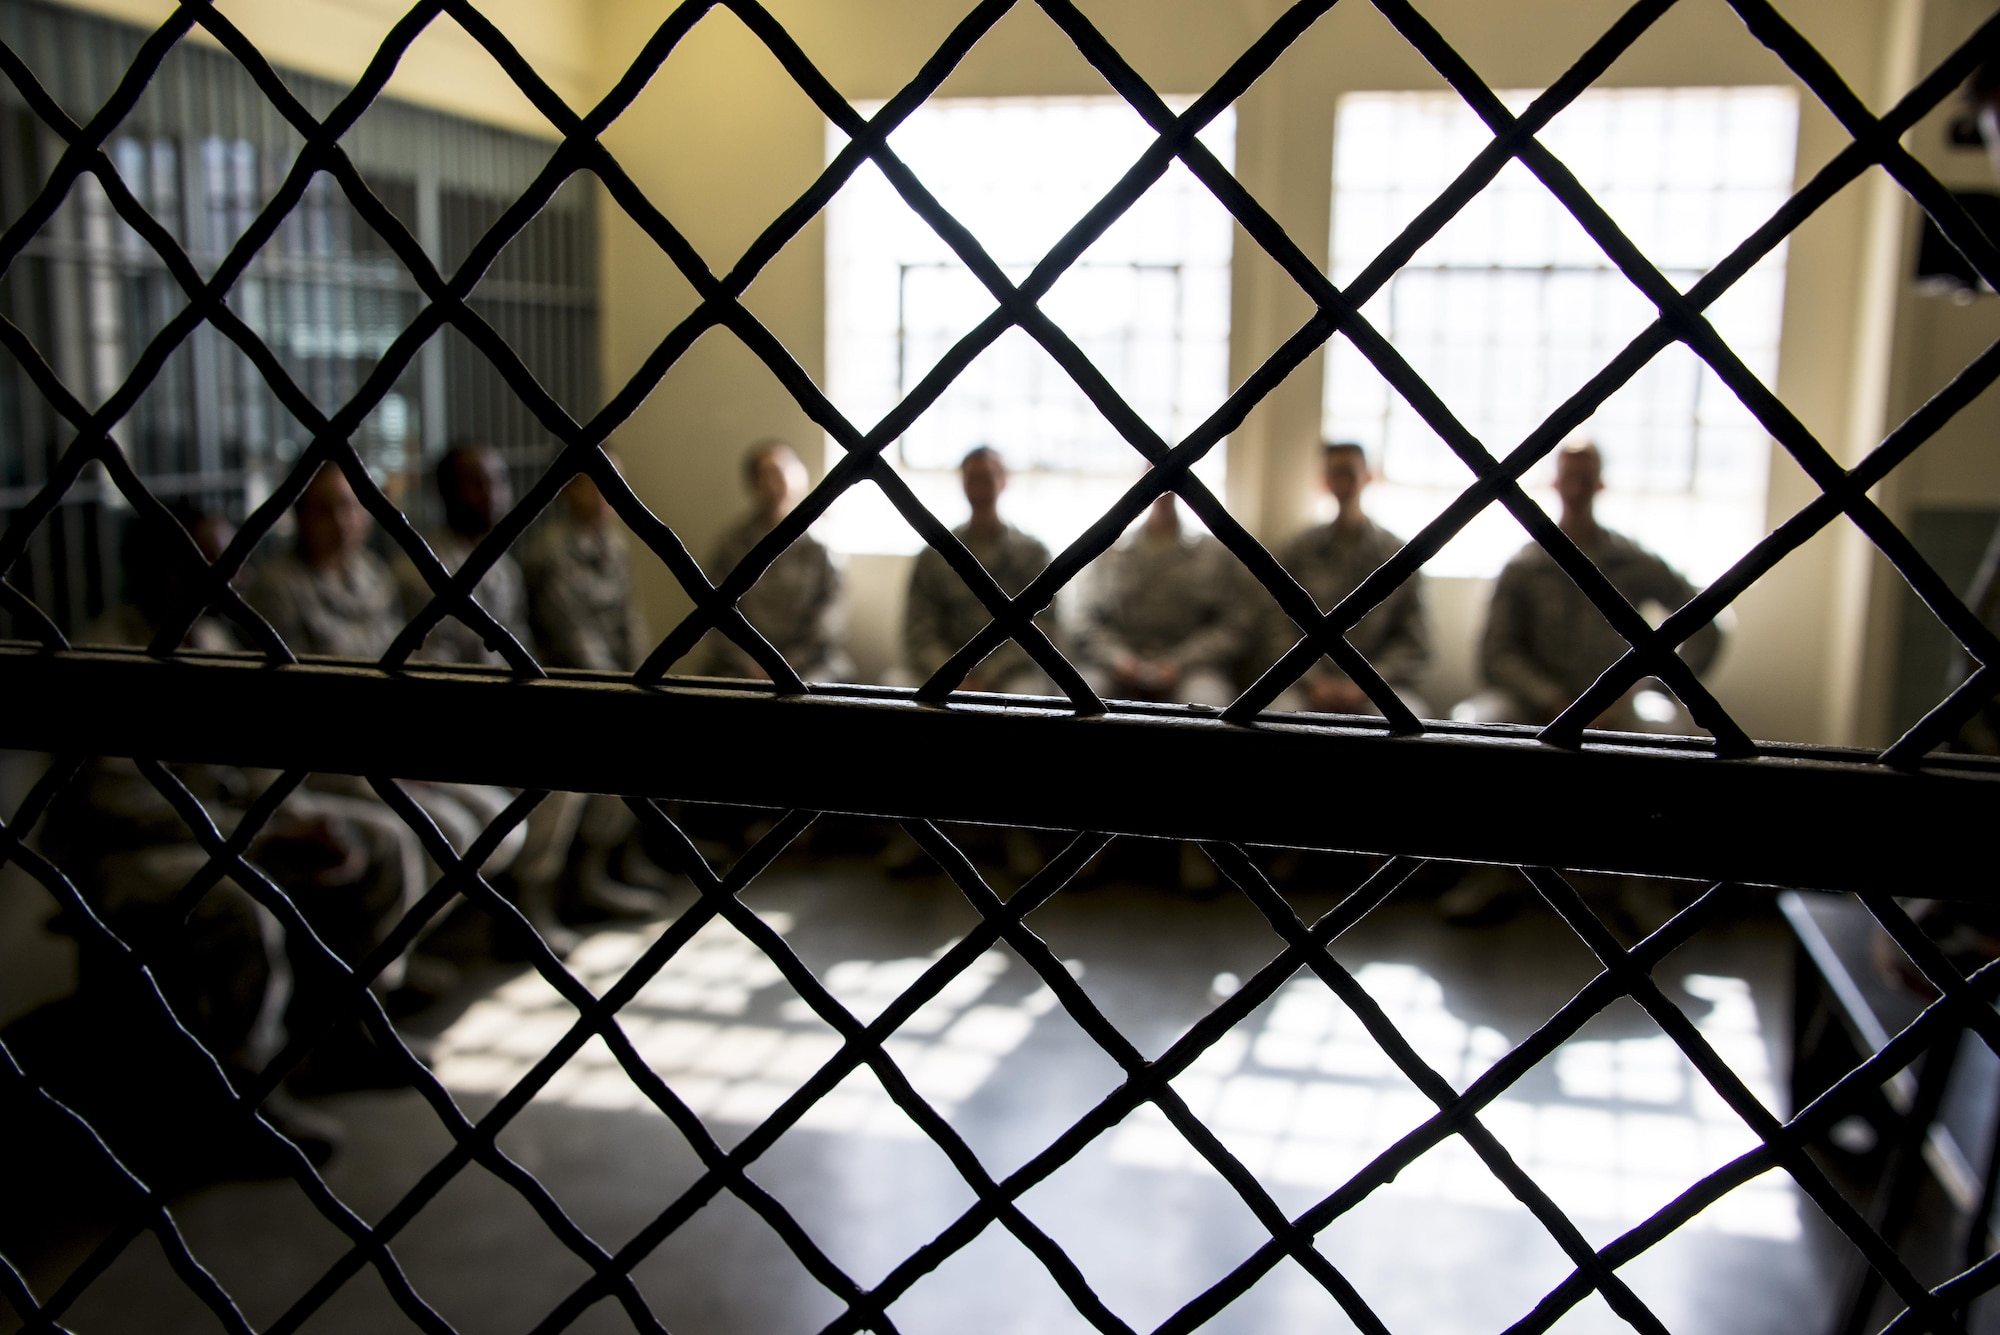 Airmen participating in the True North program await the beginning of their visit to the California Medical Facility, in Vacaville, California, Sept. 15, 2016. As part of the program, Airmen meet with inmates at CMF and hear their personal stories as well as tour the facility. (U.S. Air Force photo by Staff Sgt. Charles Rivezzo)